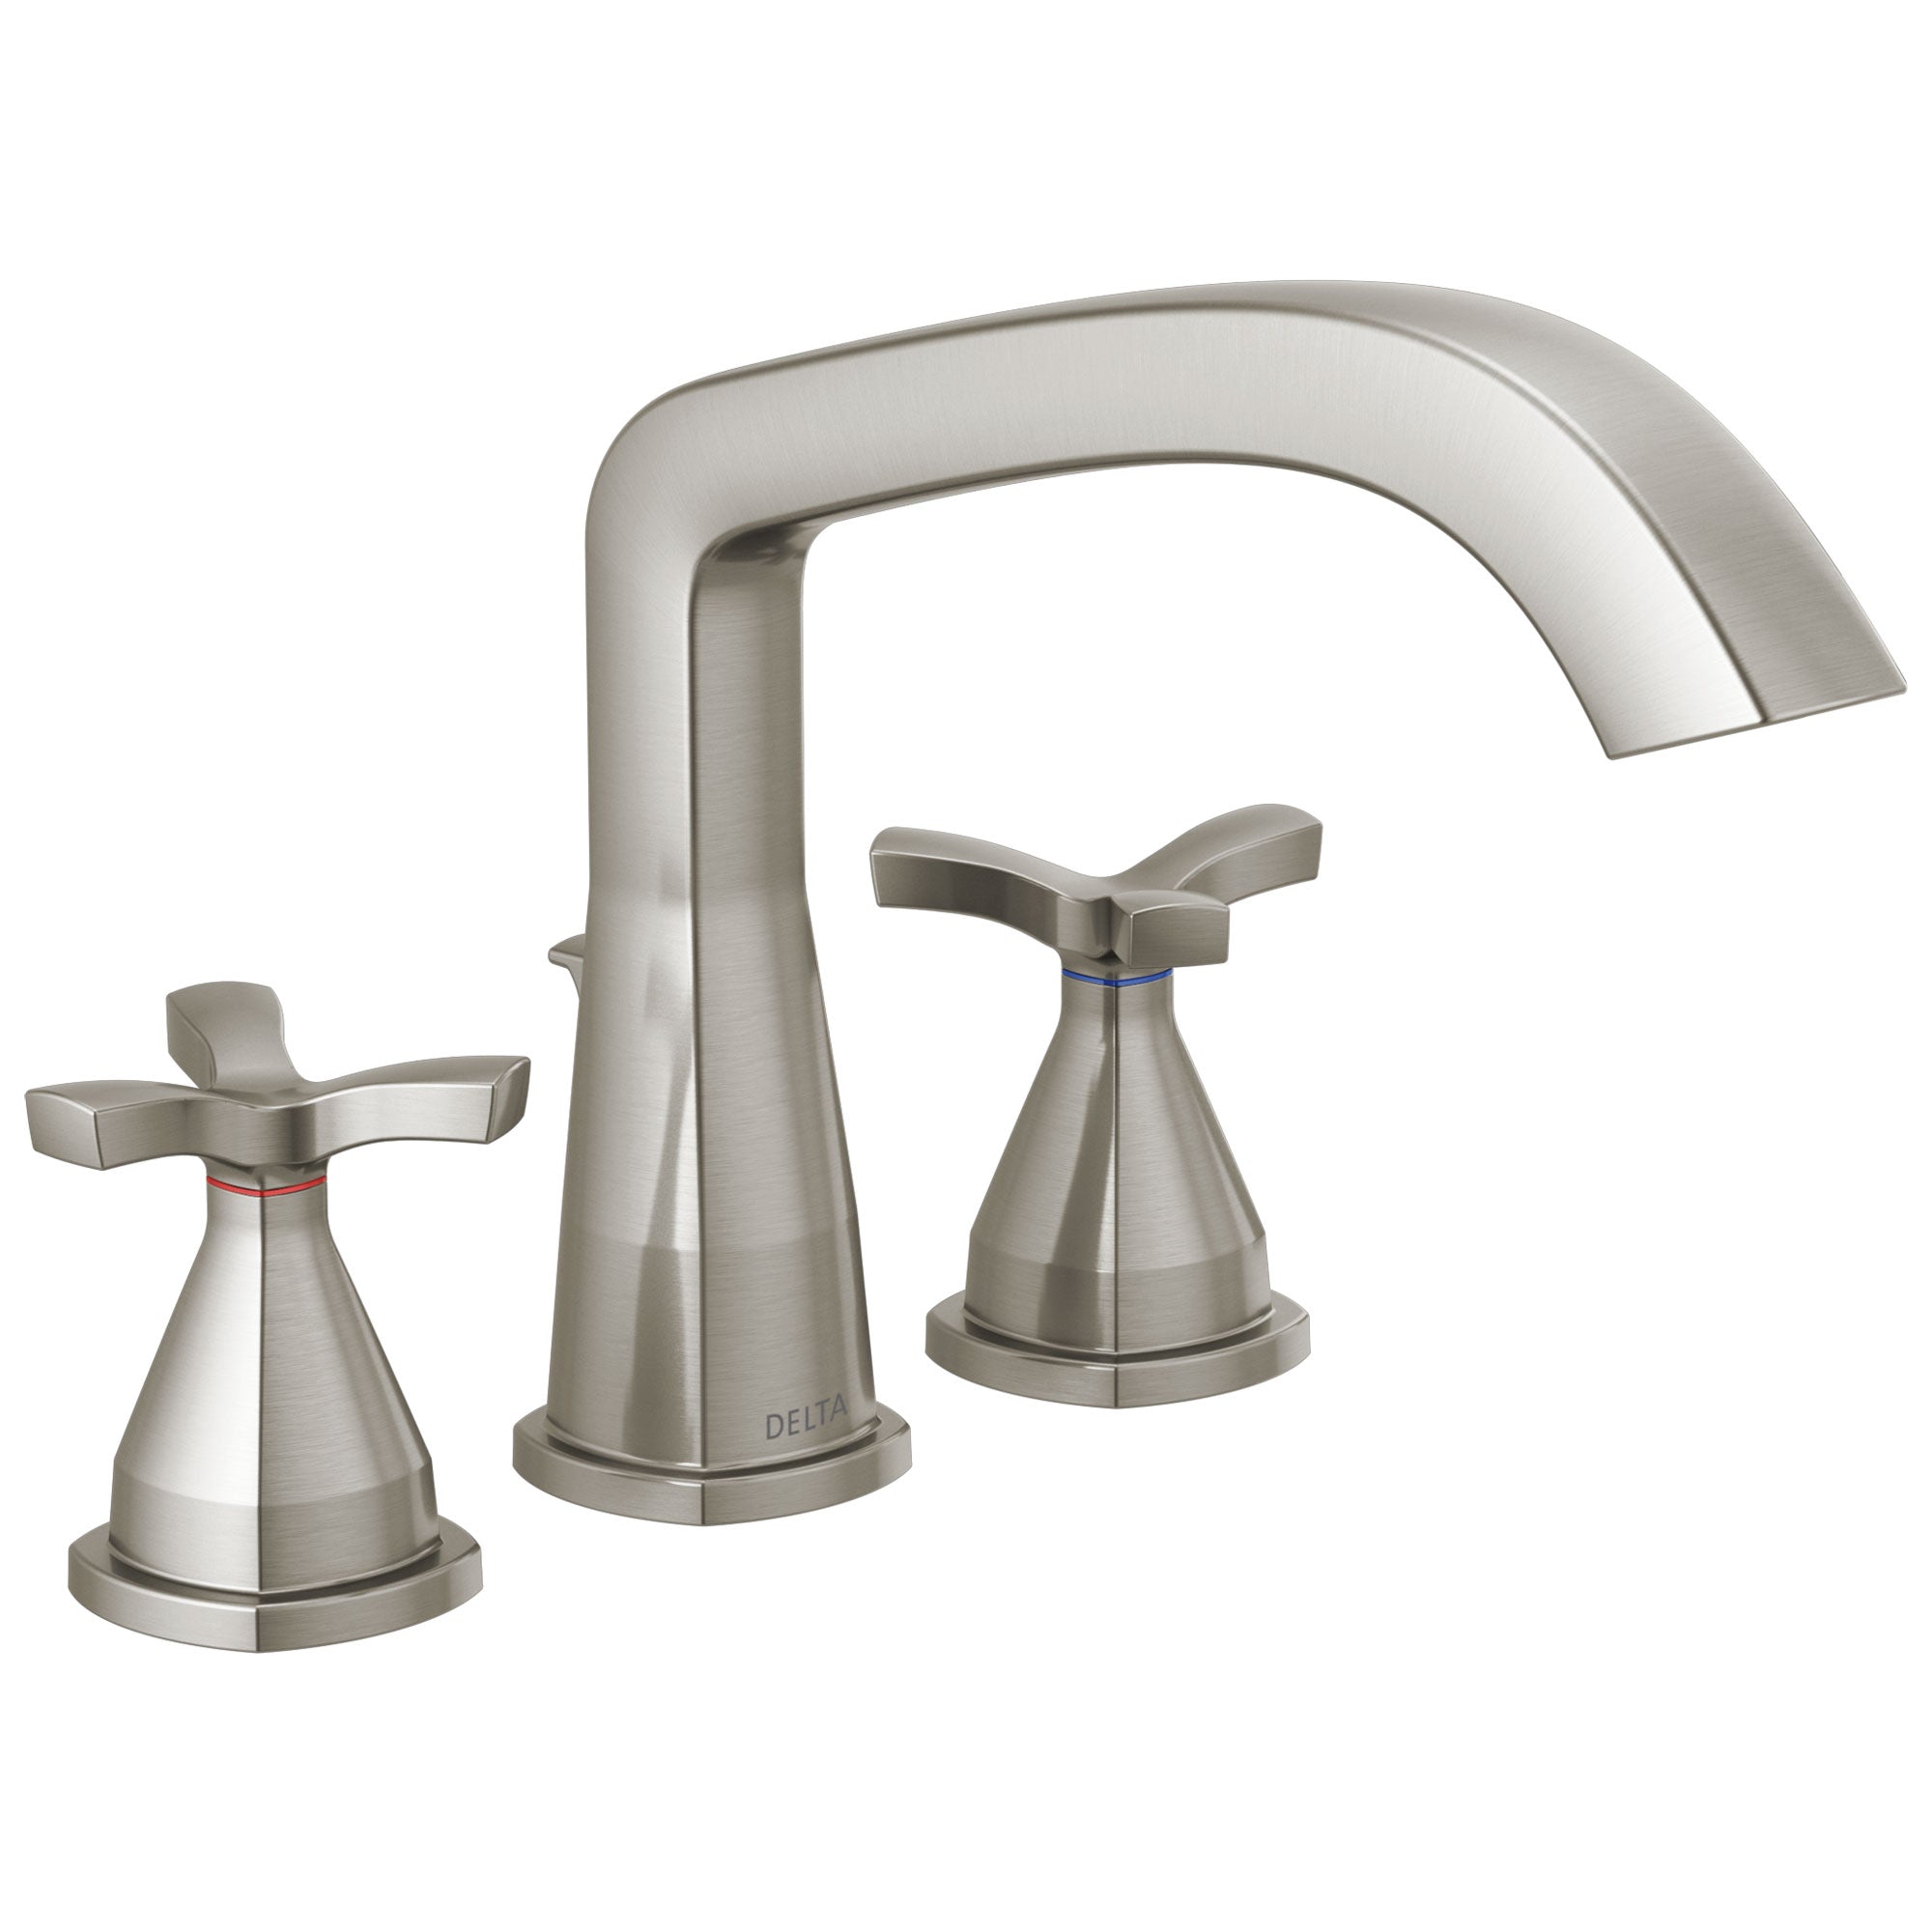 Delta Stryke Collection Stainless Steel Finish Three Hole Roman Tub Filler Faucet Includes Rough-in Valve and Helo Cross Handles D3158V